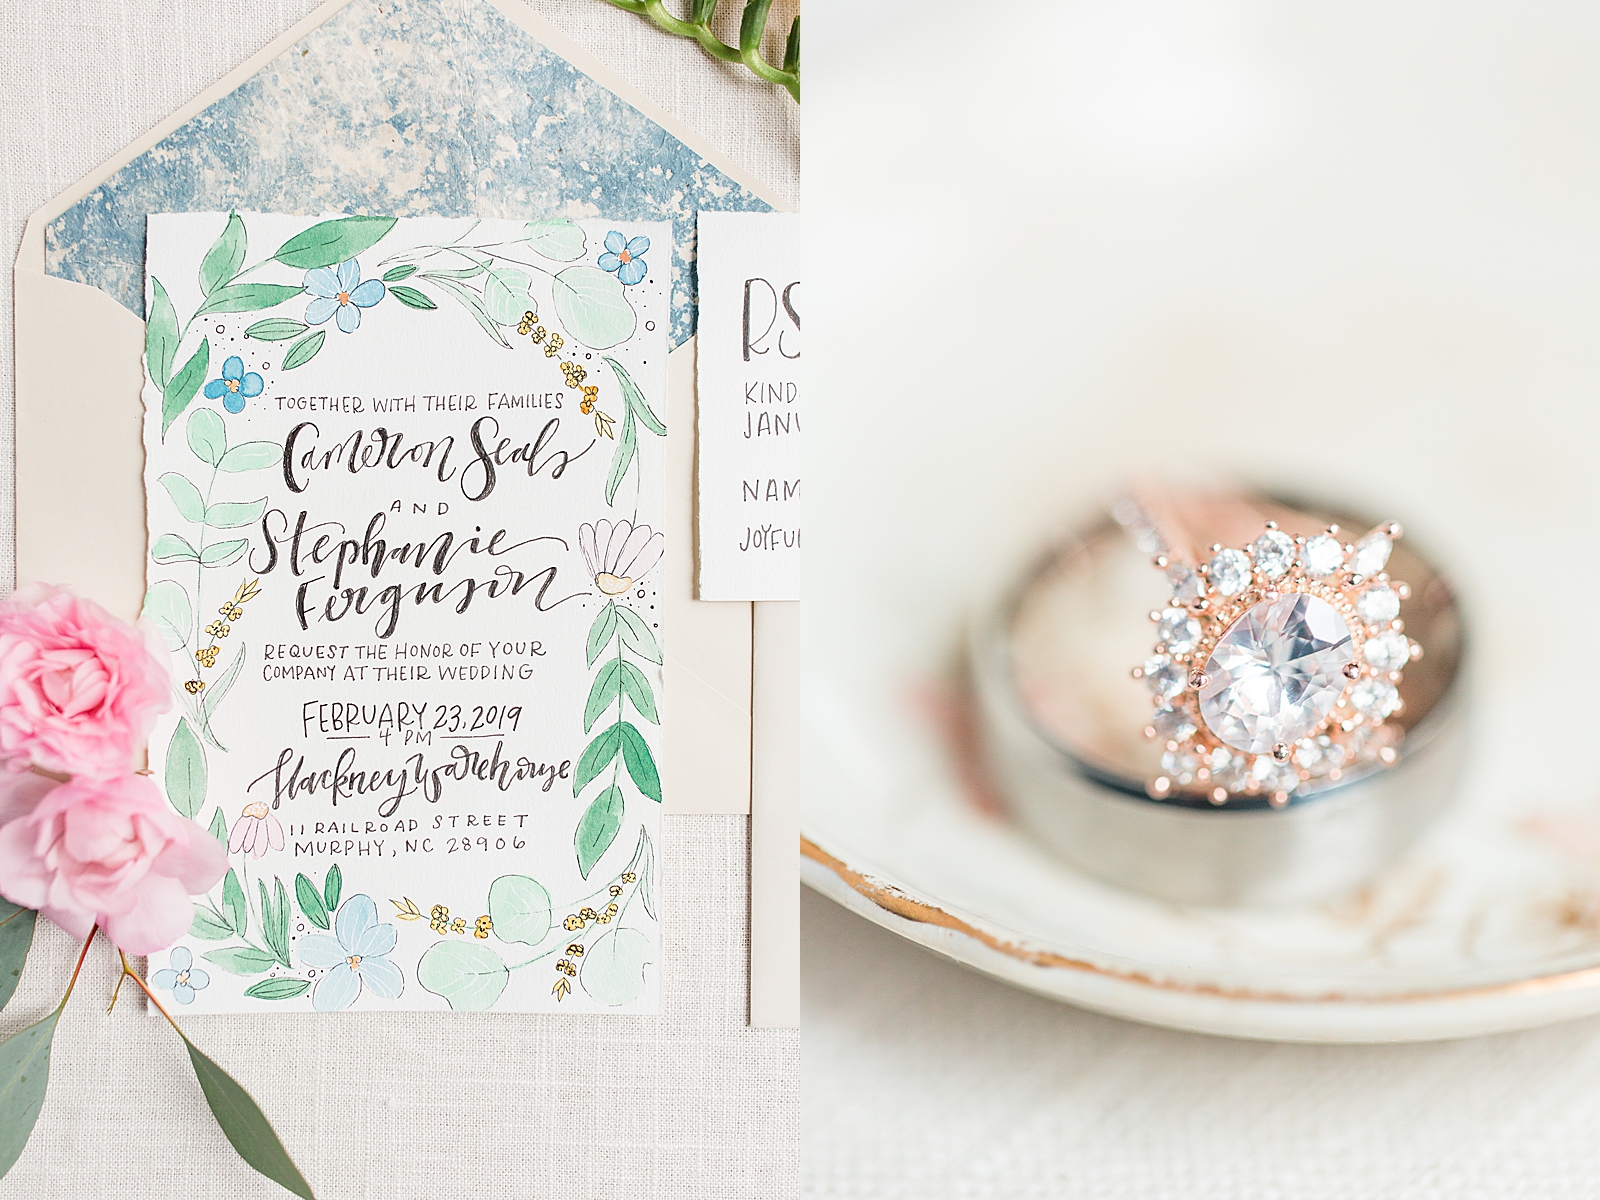 Hackney Warehouse Wedding Invitation Suite and Detail of Rings on dish Photos